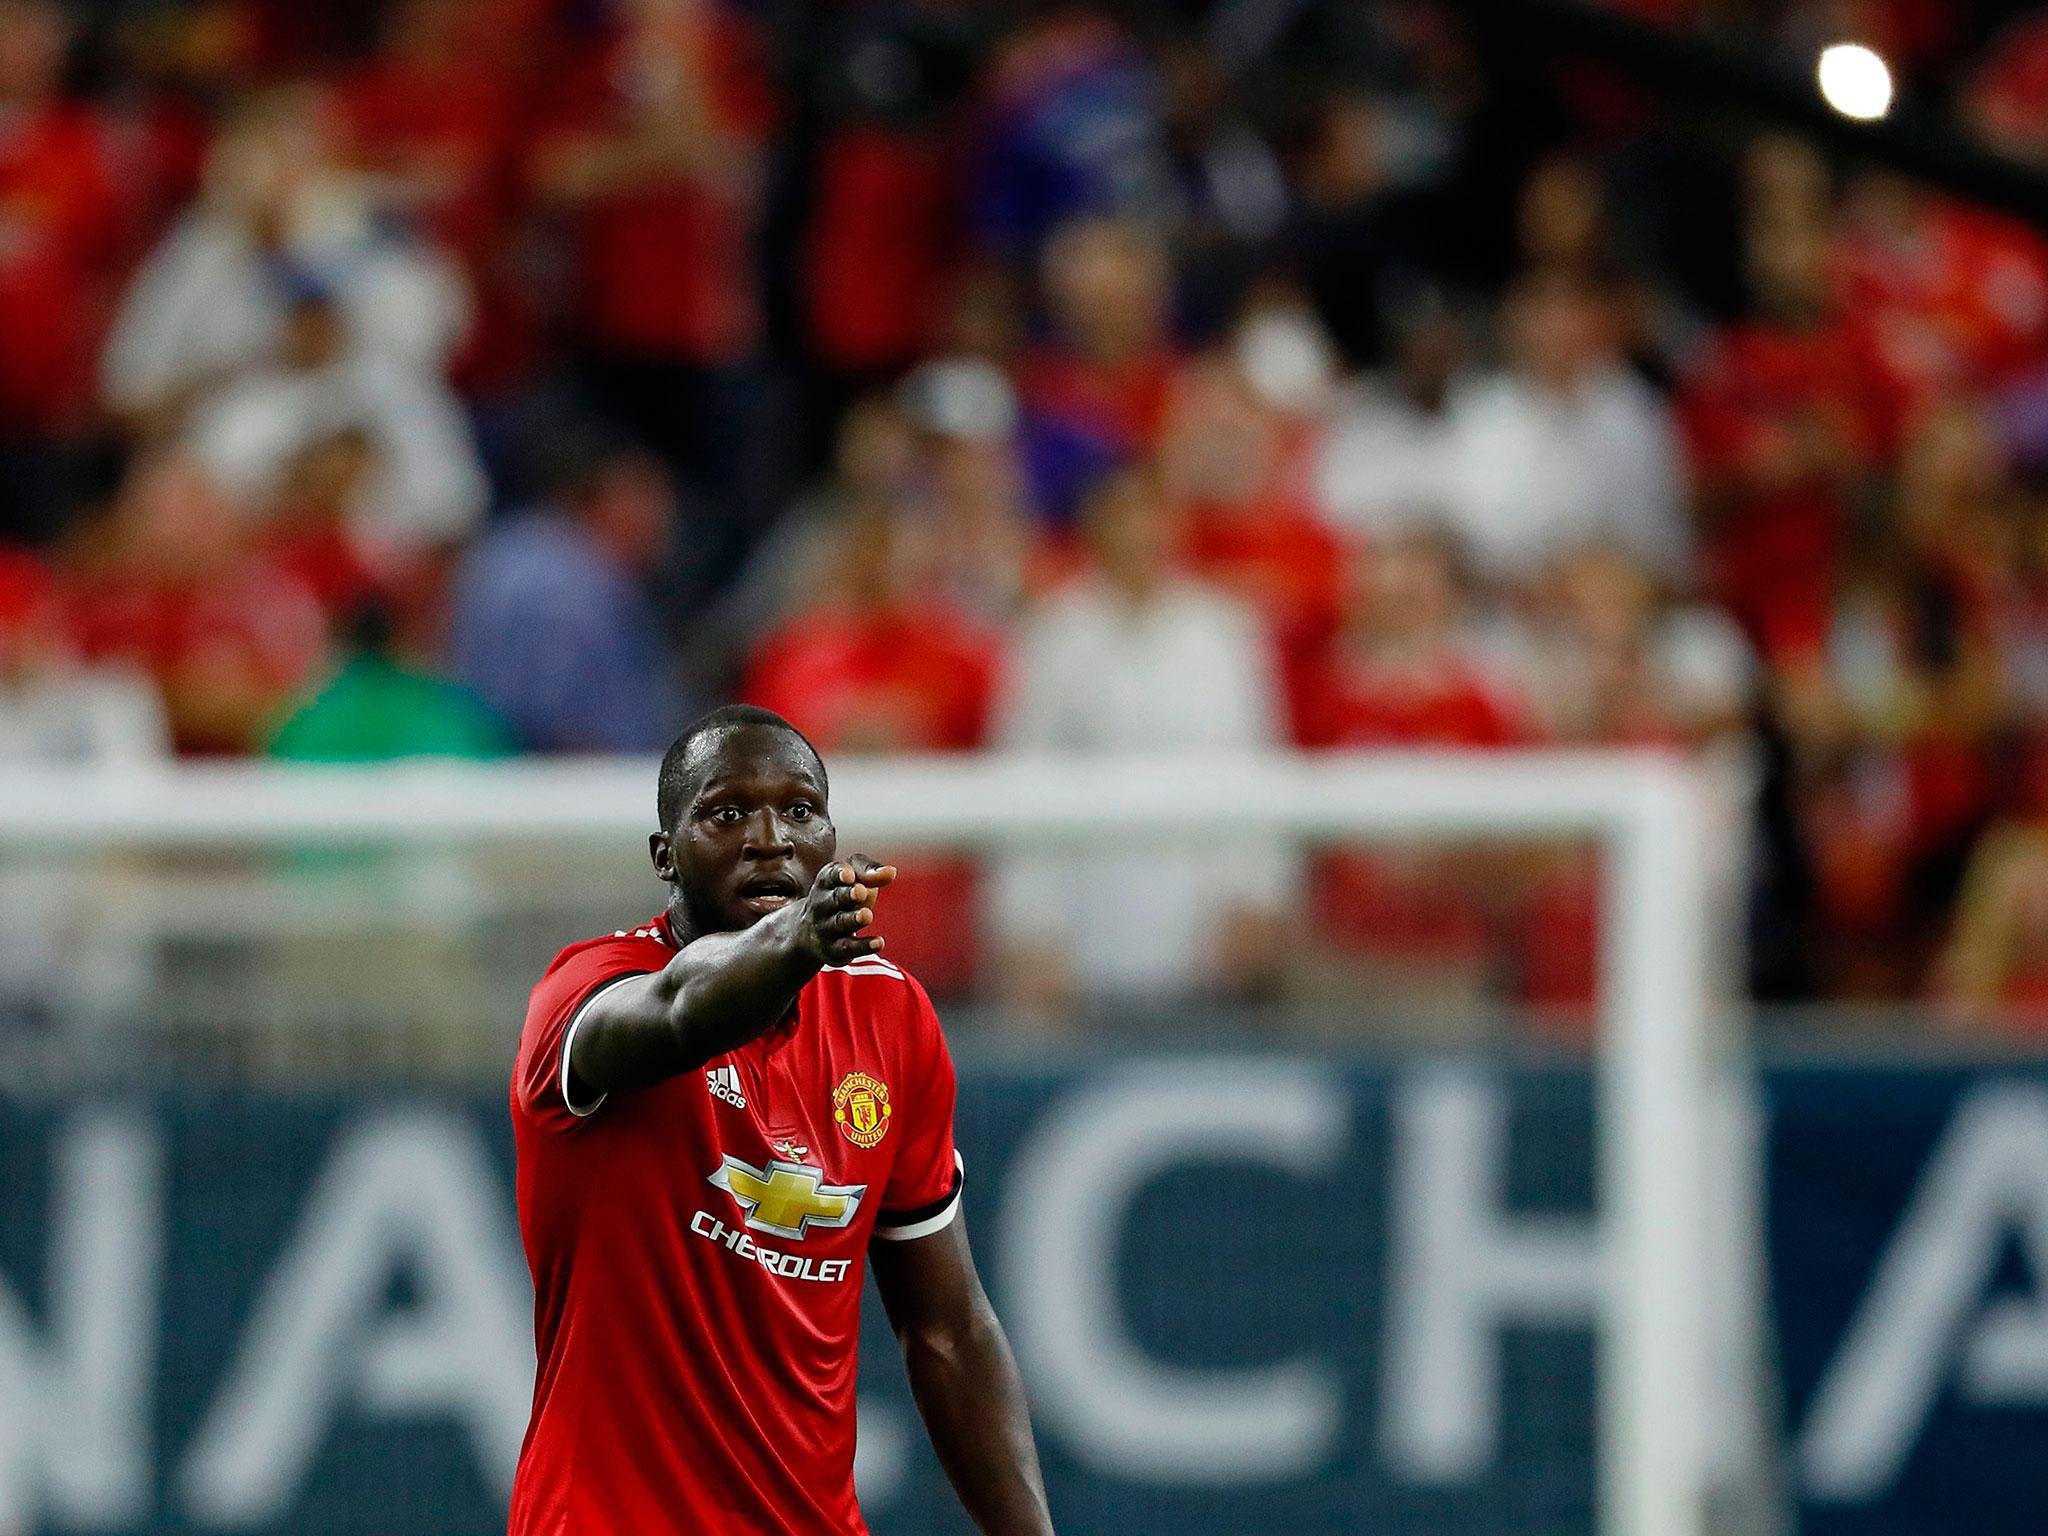 Romelu Lukaku joined United for £75m earlier this month